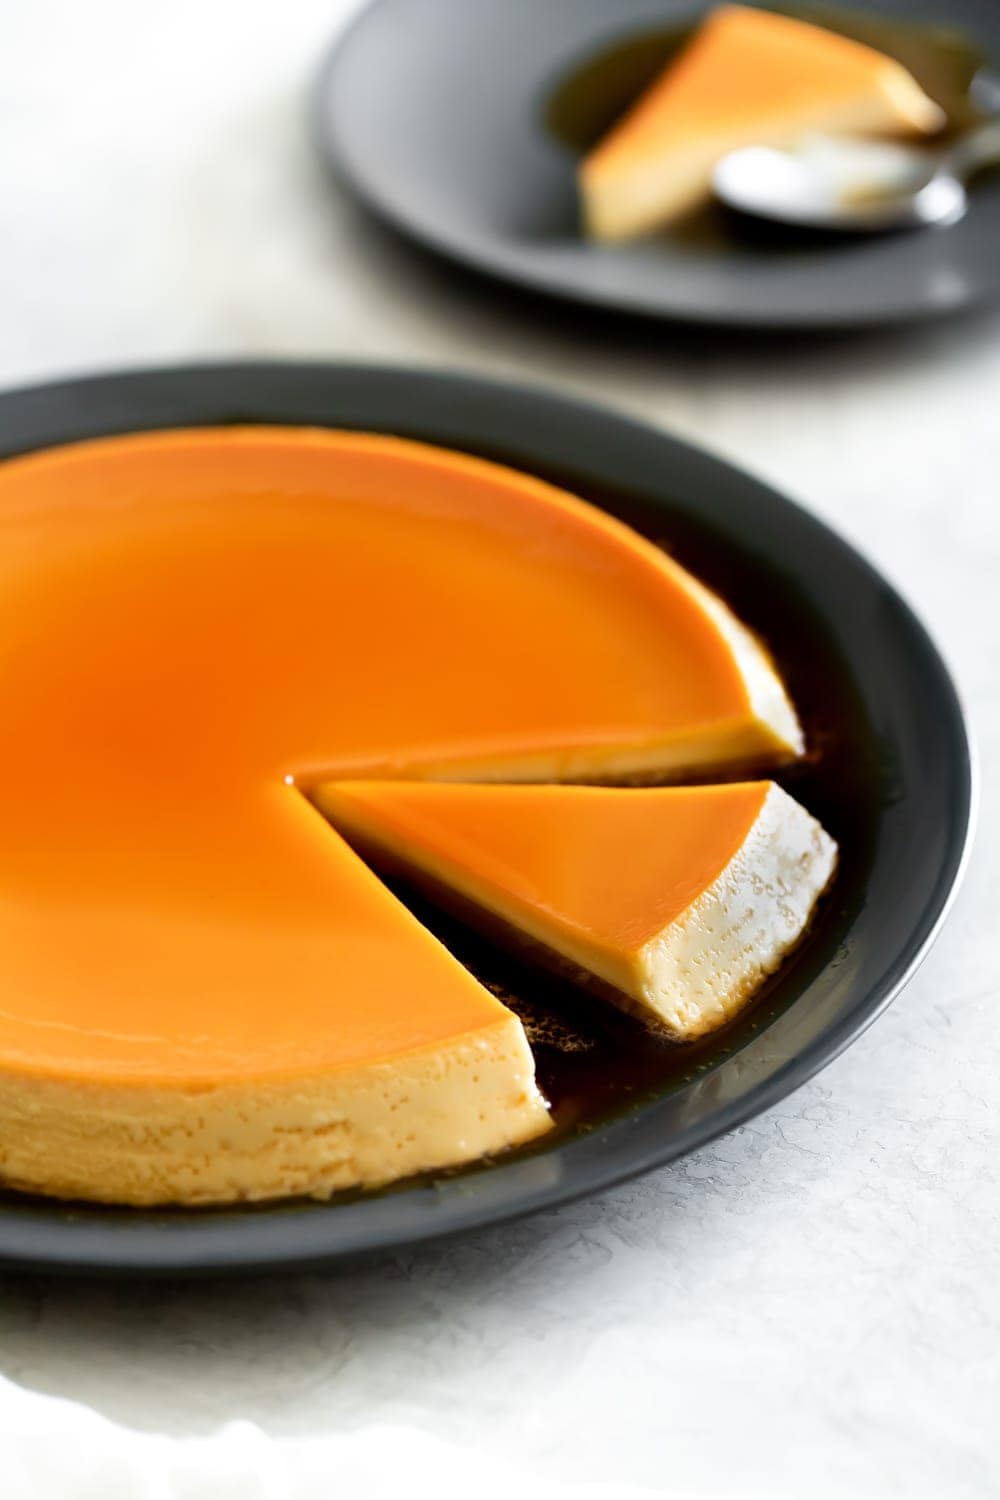 flan de queso with a slice taken out on a black plate